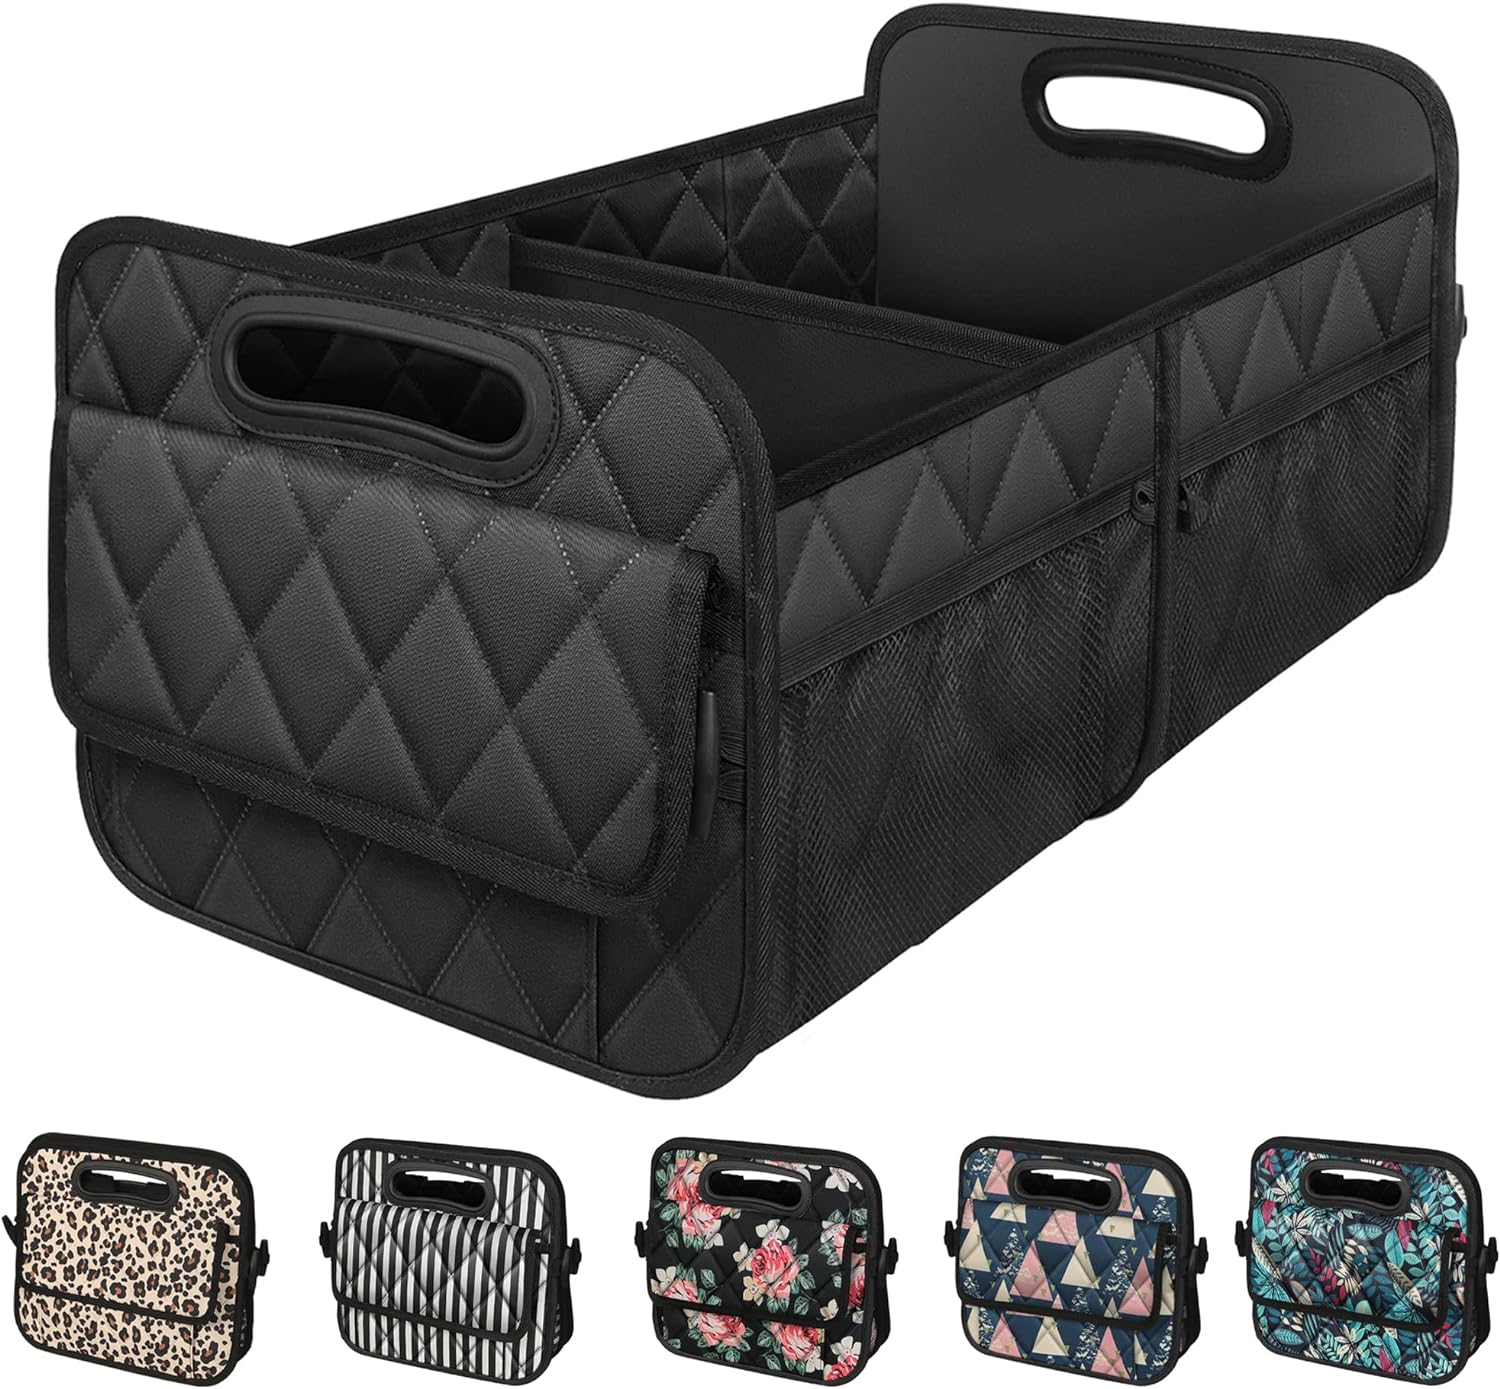 Car Trunk Organizer for SUV, Car Organizers and Storage with 6 Pocket, Car Accessories for Women/Men 50LWaterproof Polyester Trunk Organizer, Black